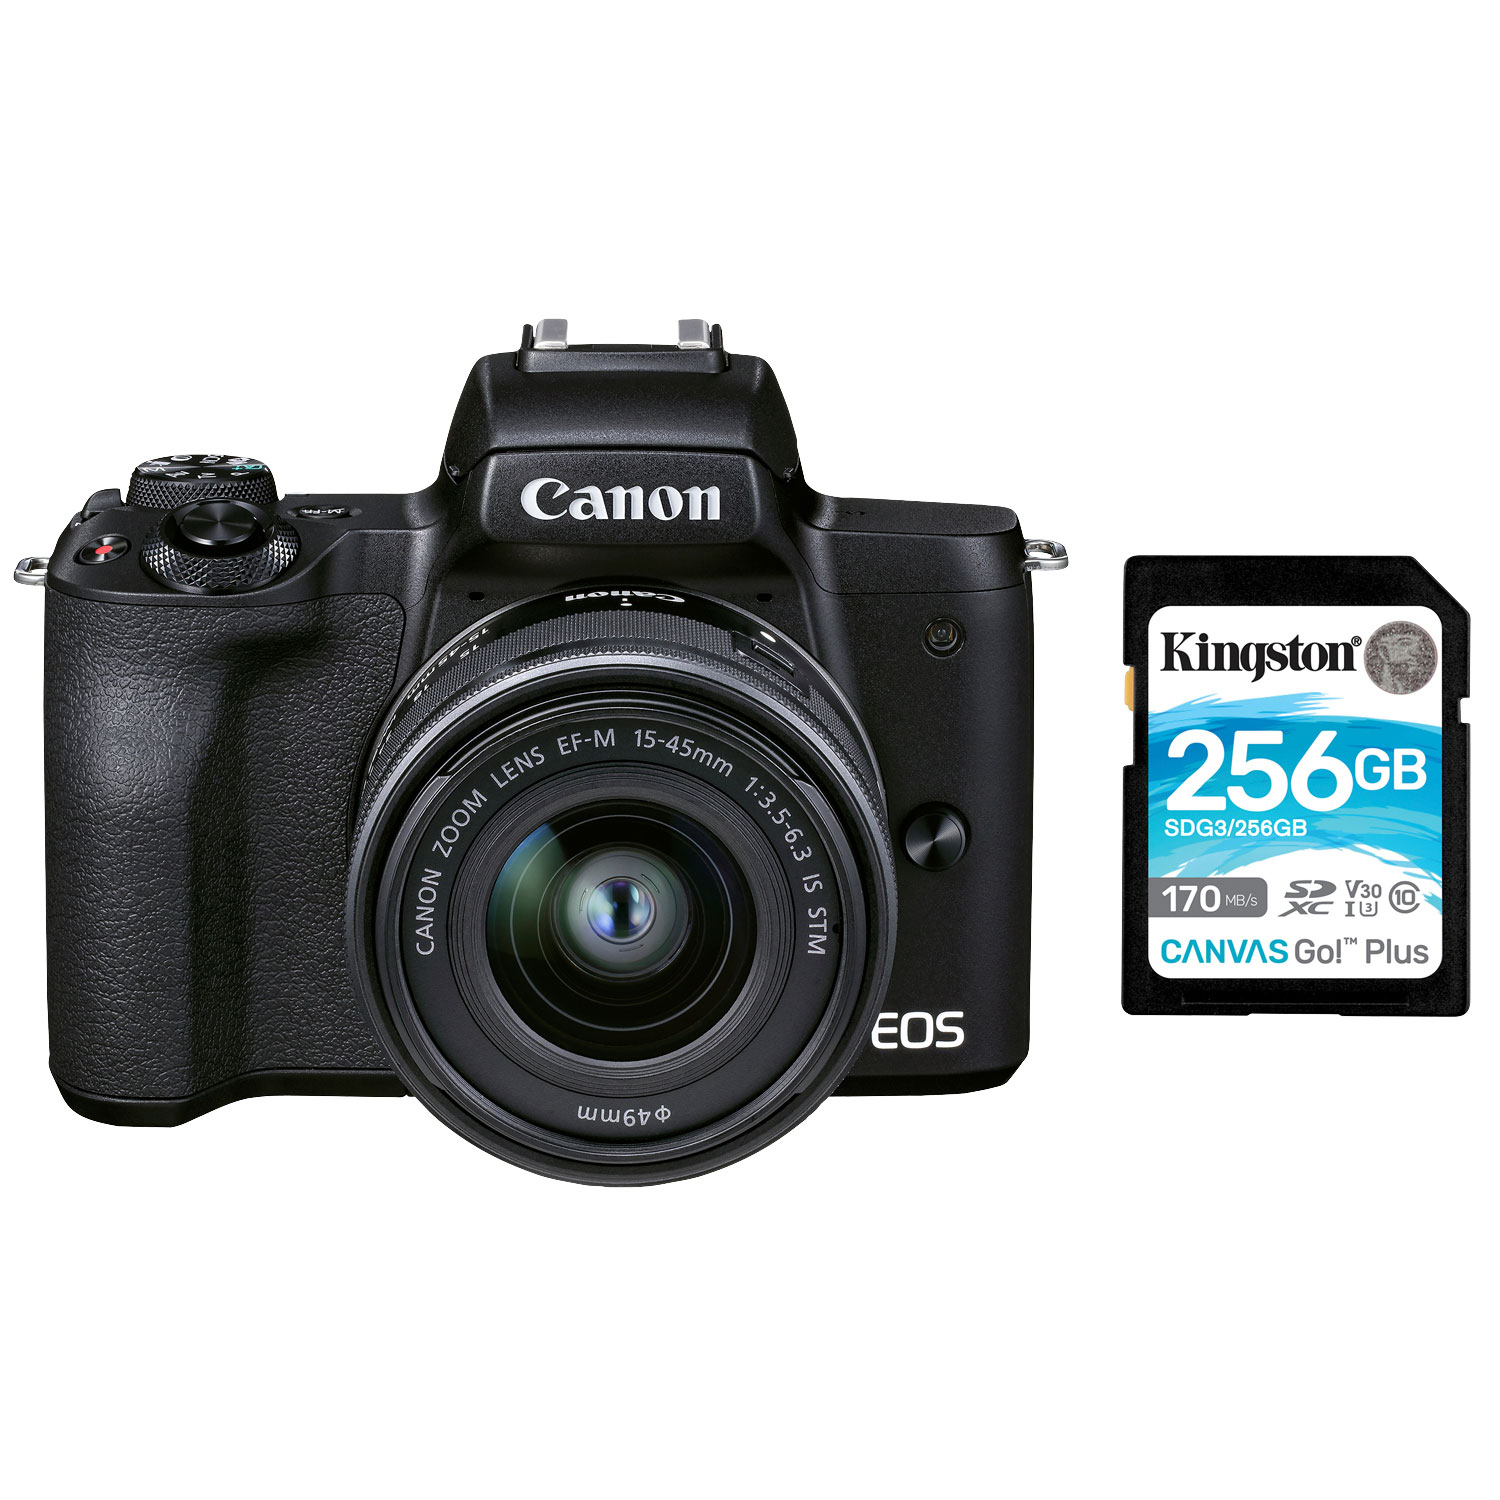 Canon EOS M50 Mark II Mirrorless Camera with 15-45mm IS STM Lens Kit with 256GB Memory Card